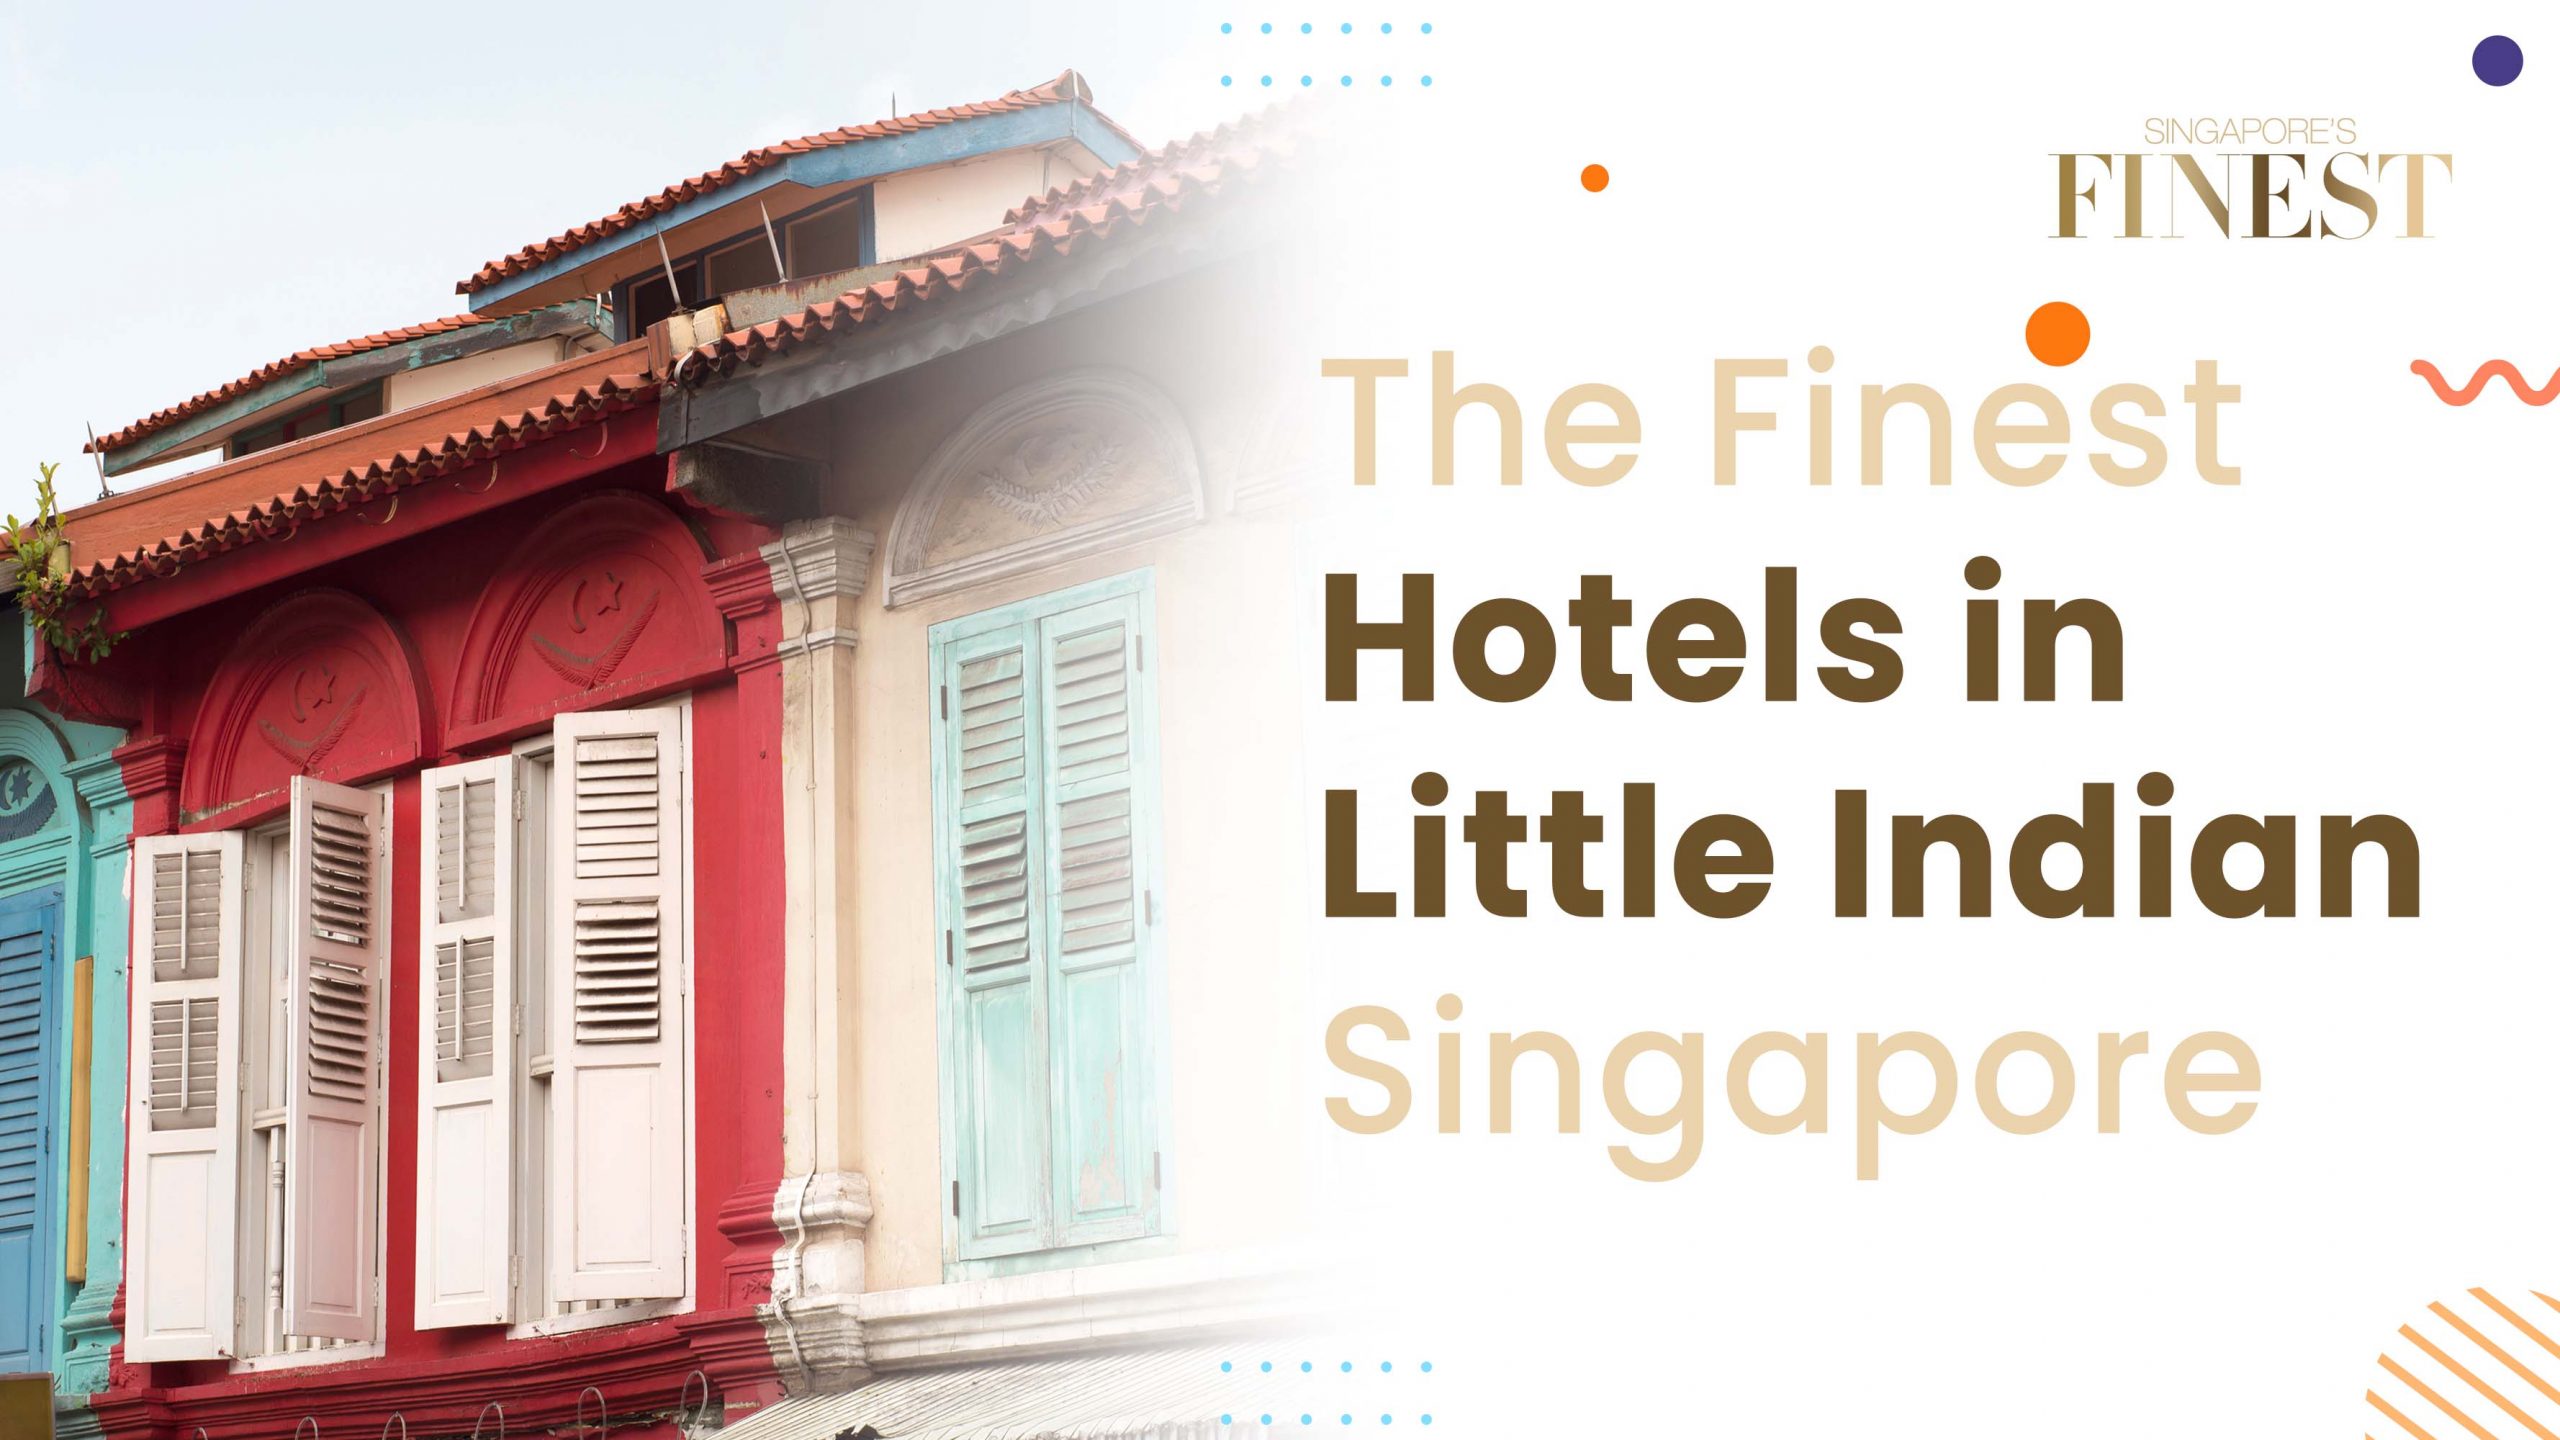 The Finest Hotels in Little India Singapore